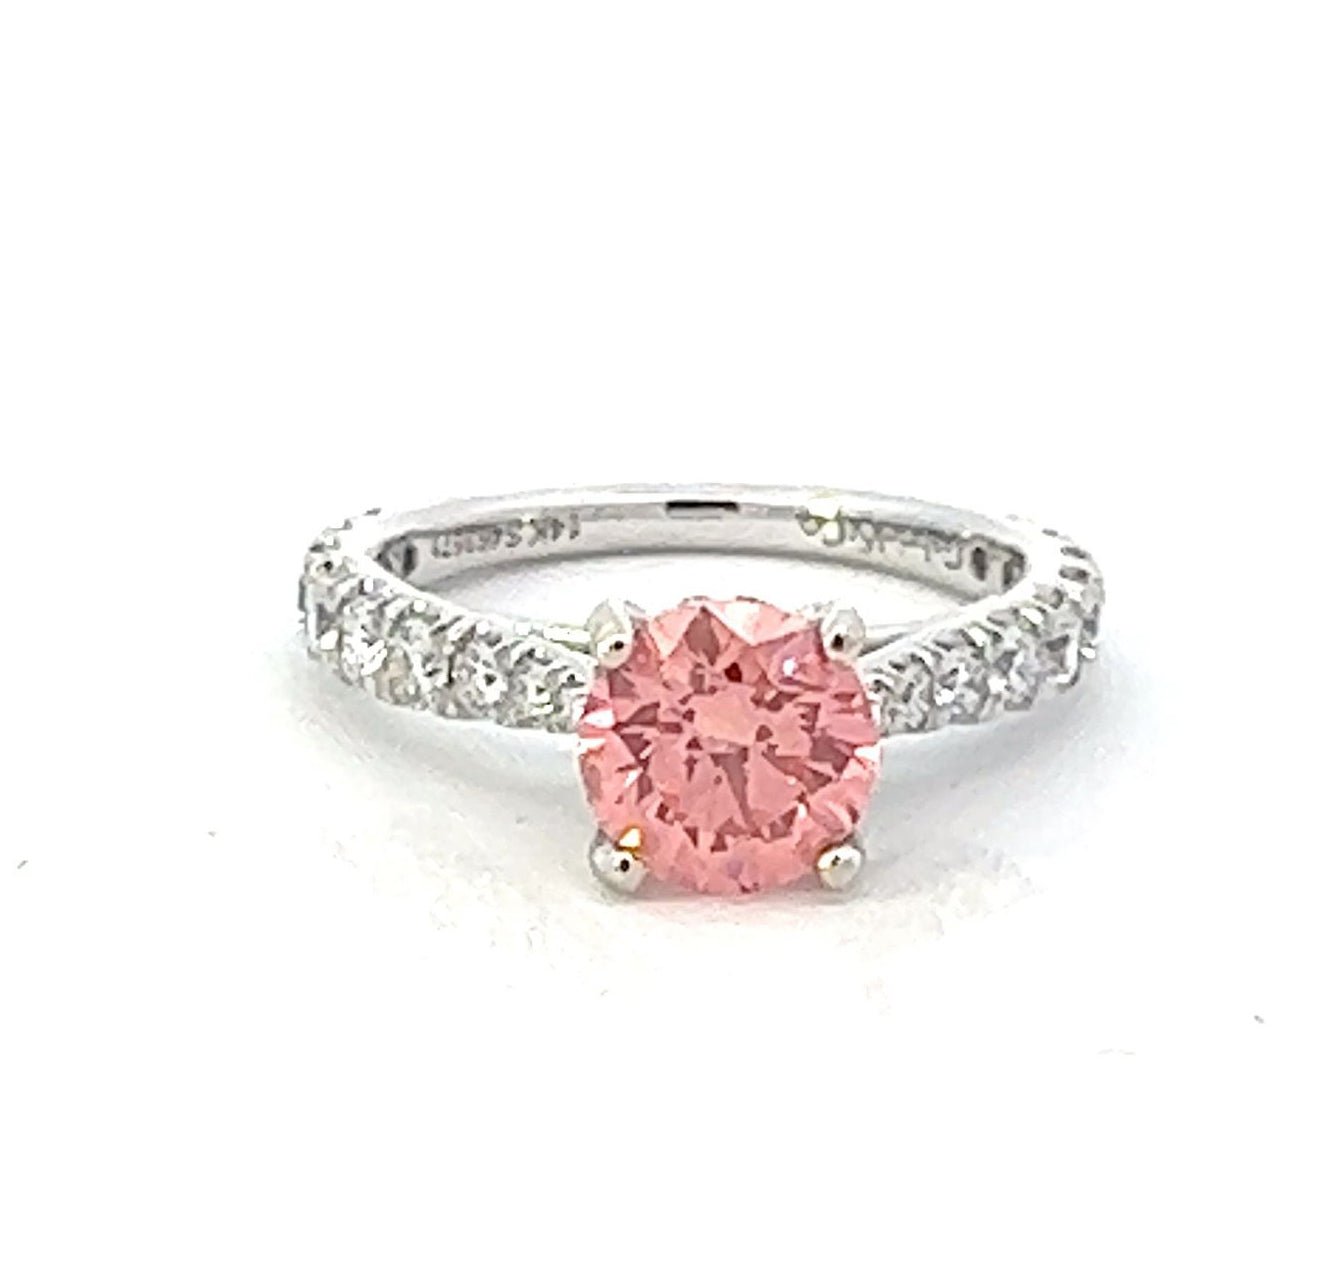 Art Deco .77 Carat Fancy Pink-Brown Diamond Engagement Ring by J.R. Wood -  GIA